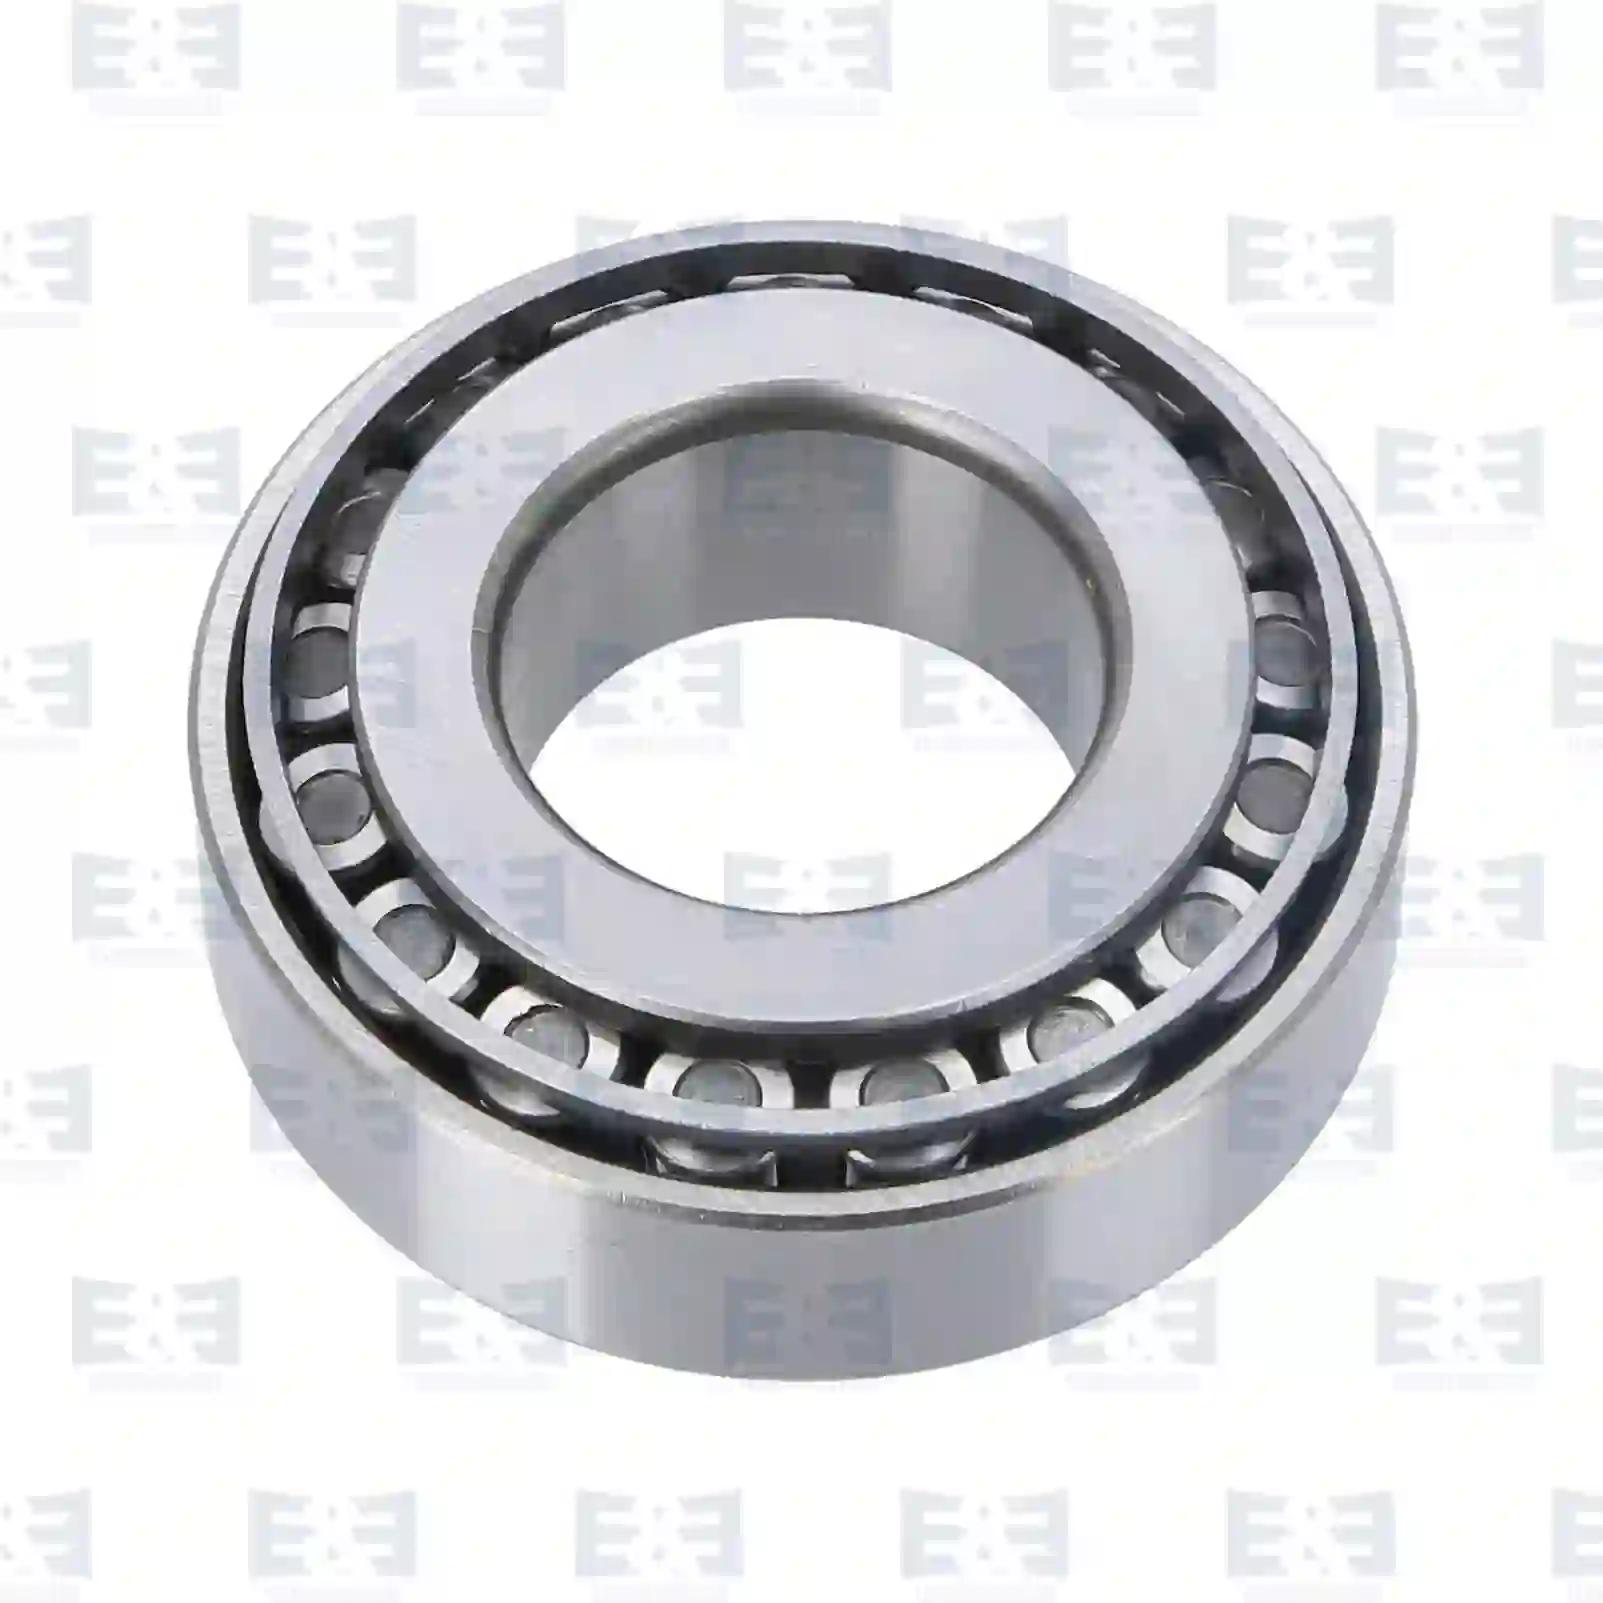 Bearings Tapered roller bearing, EE No 2E2286403 ,  oem no:0264053500, MA111370, MB025345, MB035007, MB393956, 15919, 005092244, 1440637X1, TK004209923, TK4209923, 12337579, 94032099, 94248083, 988435105, 988435105A, 988435109, 988435109A, SZ36635005, 91007-P5D-007, 91007-PY4-003, 53232-11000, 8-12337579-0, 8-94248083-0, 8-94248083-1, 9-00093172-0, 26800130, 00221-27210, 06324990068, 06324990079, 81934200064, 87523300200, A0773220700, 022127141, 0221271410, 022127210, 055933075, 075527141, 000720032207, 0089817405, 0089817605, 2506263031, 250626303101, 3199810005, MA111370, MB0025345, MB025345, MB035007, MB393956, 32219-9X501, 40210-F3900, 0023432207, 0959232207, 0959532207, 5000388284, 5000388401, 5010241918, 5516010573, 7701465647, 7703090093, 202635, 183684, 19577, ZG02971-0008 E&E Truck Spare Parts | Truck Spare Parts, Auotomotive Spare Parts